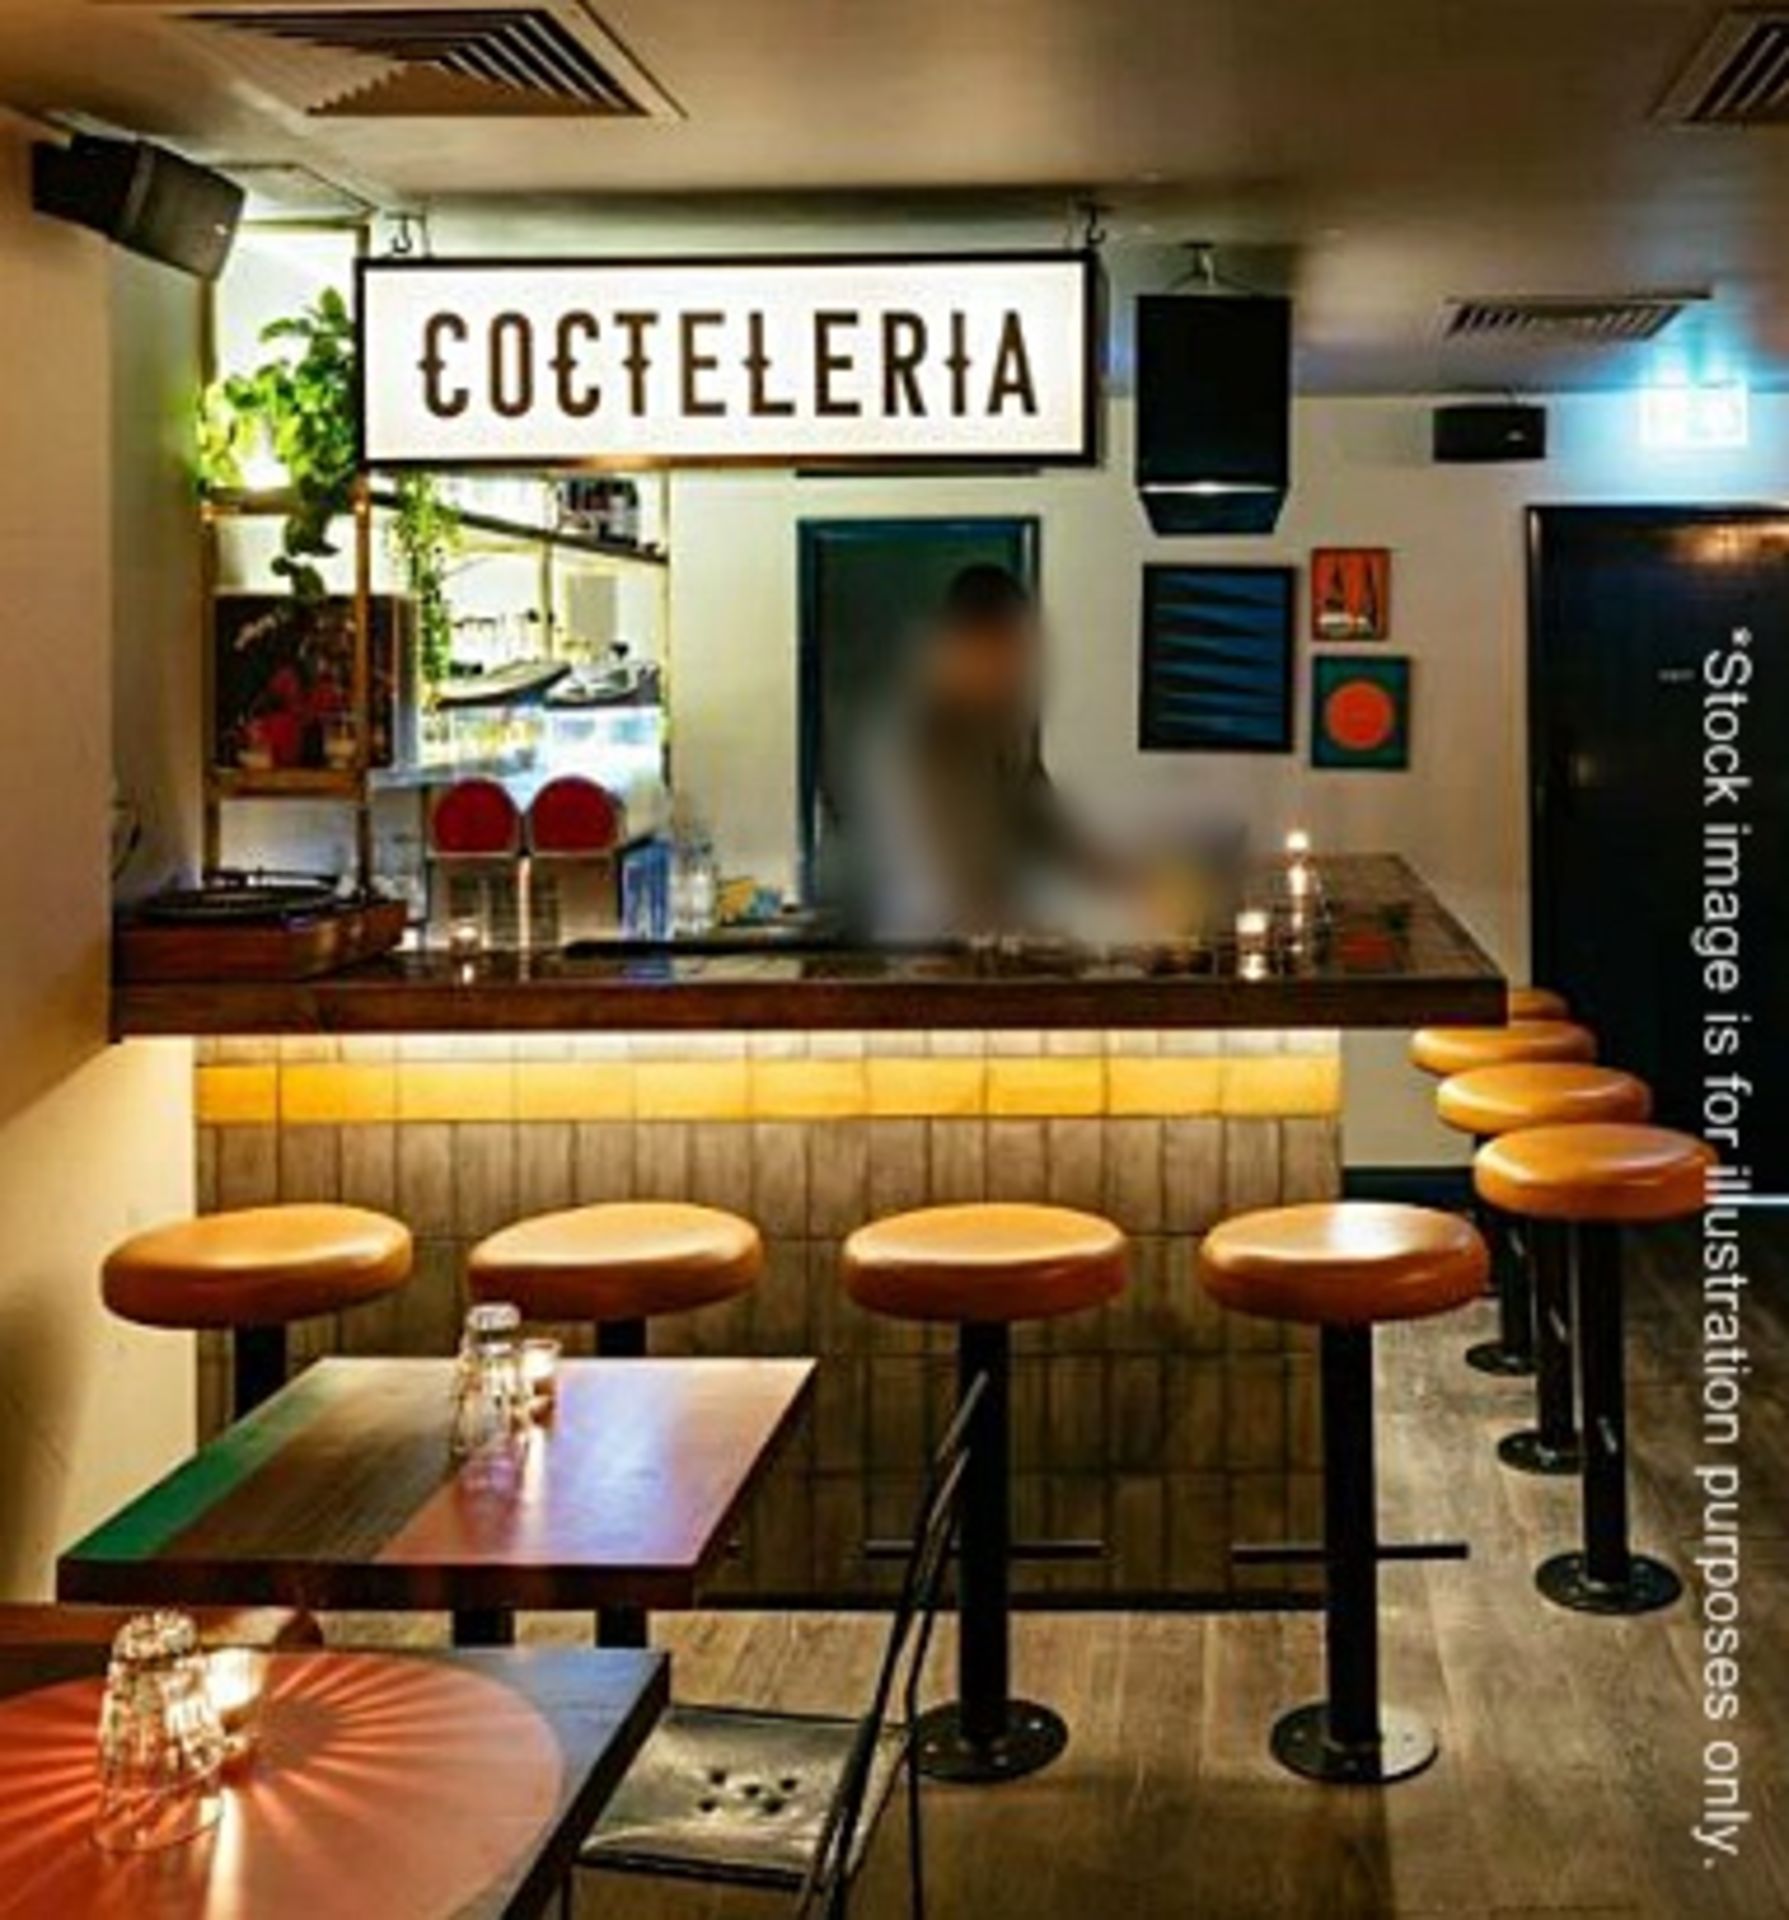 1 x Display Light Box Bar Signage "COCTELERIA" - Ideal For Restaurants, Wine Bars And Night